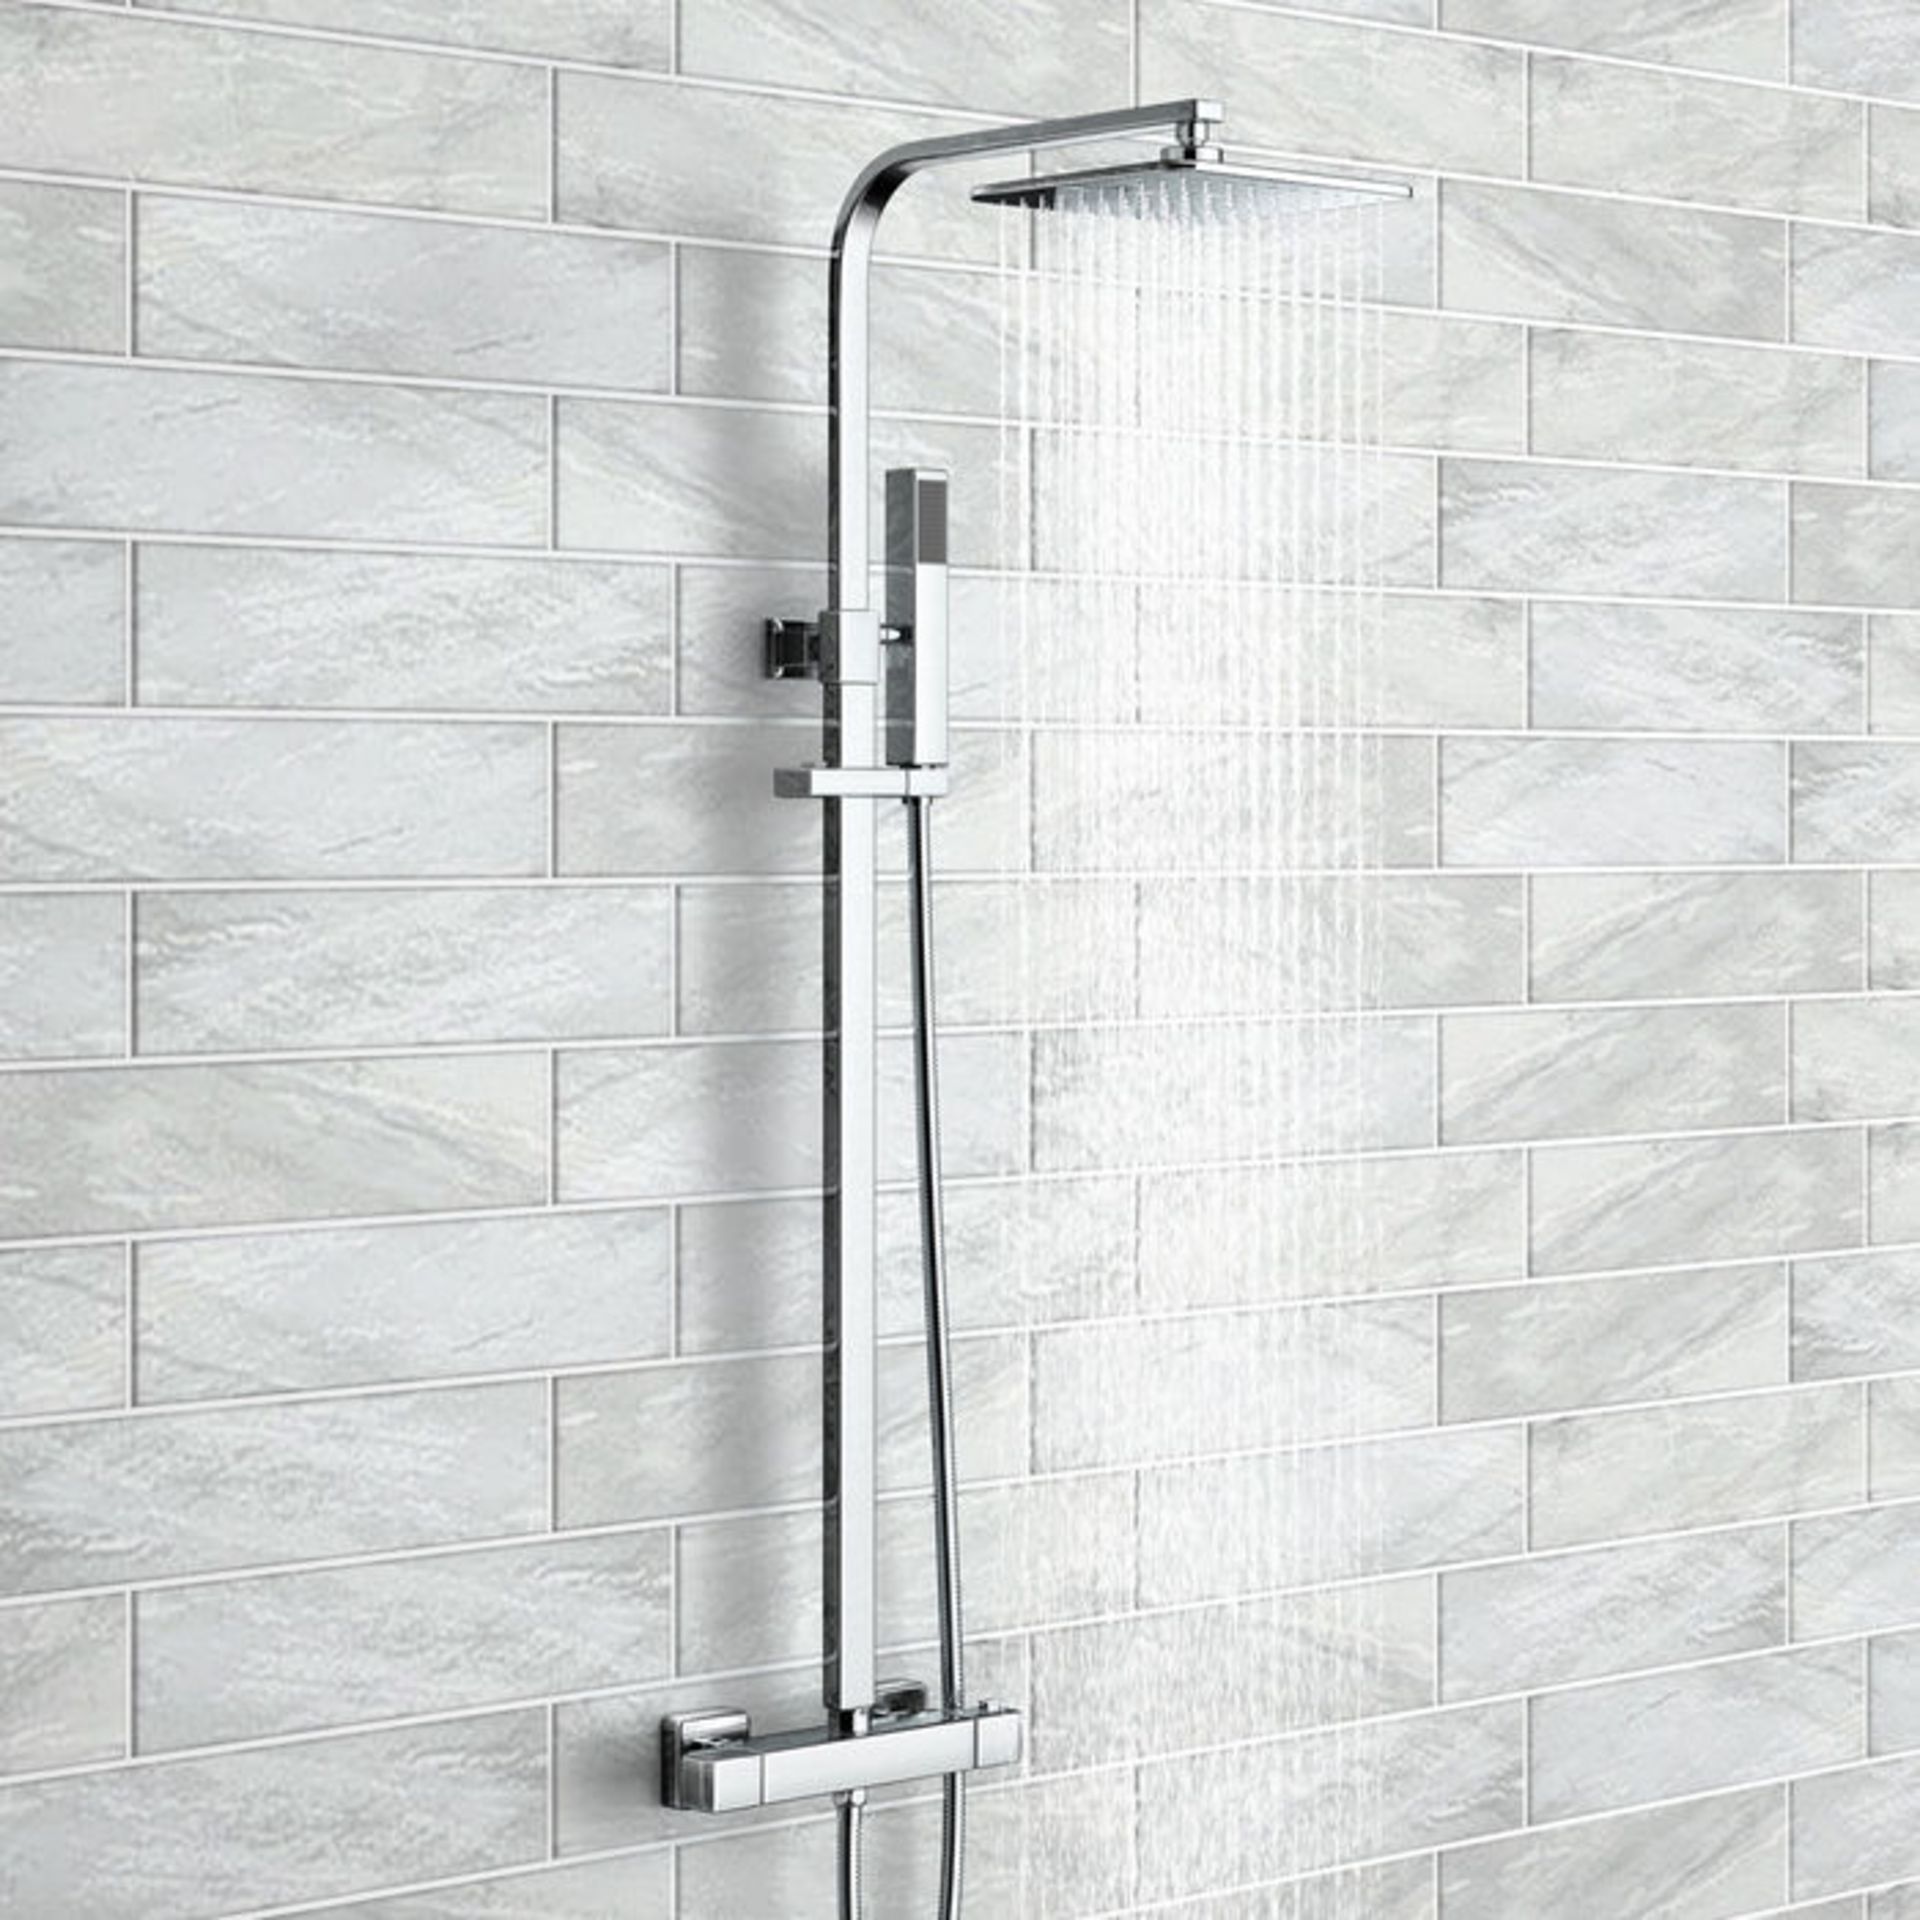 (H34) Square Exposed Thermostatic Shower Kit & Medium Head. Style meets function with our gorgeous